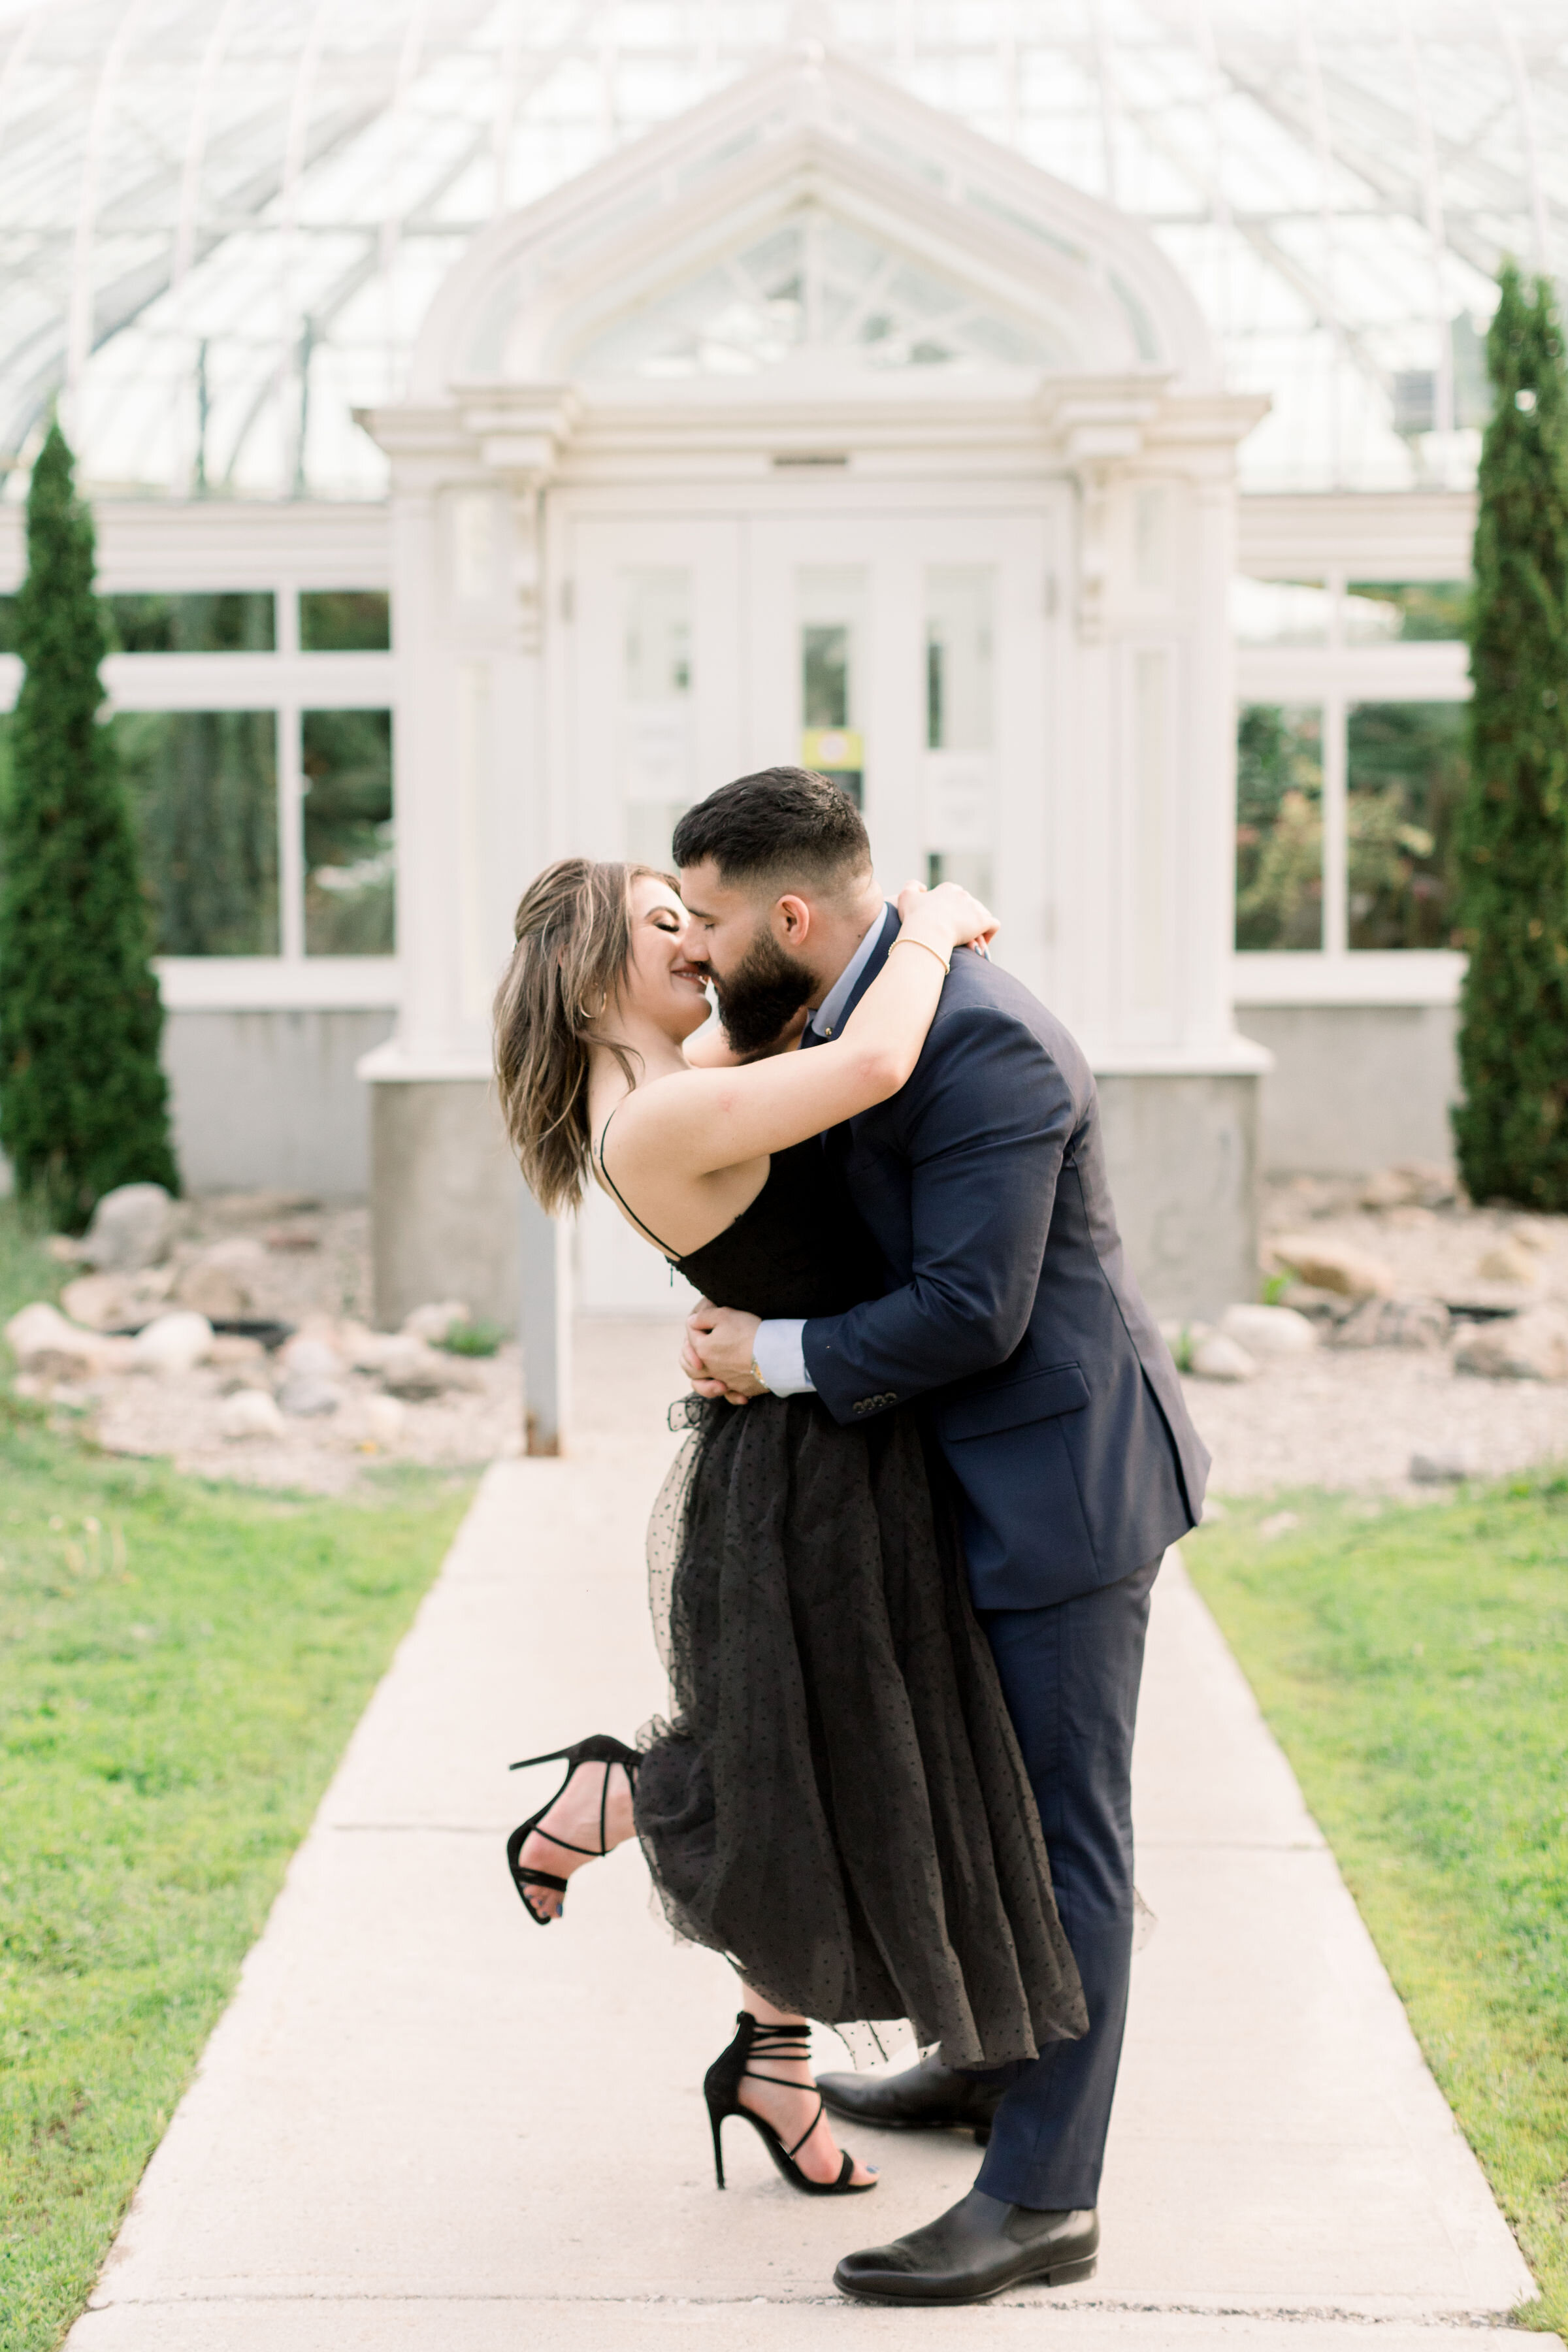  Romantically bending down for a kiss, Ottawa, Canada engagement photographer, Chelsea Mason Photography captures this soon-to-be groom holding his fiancé tightly while she pops her foot. pop foot kissing photo pose couples photographer Ottawa Canada